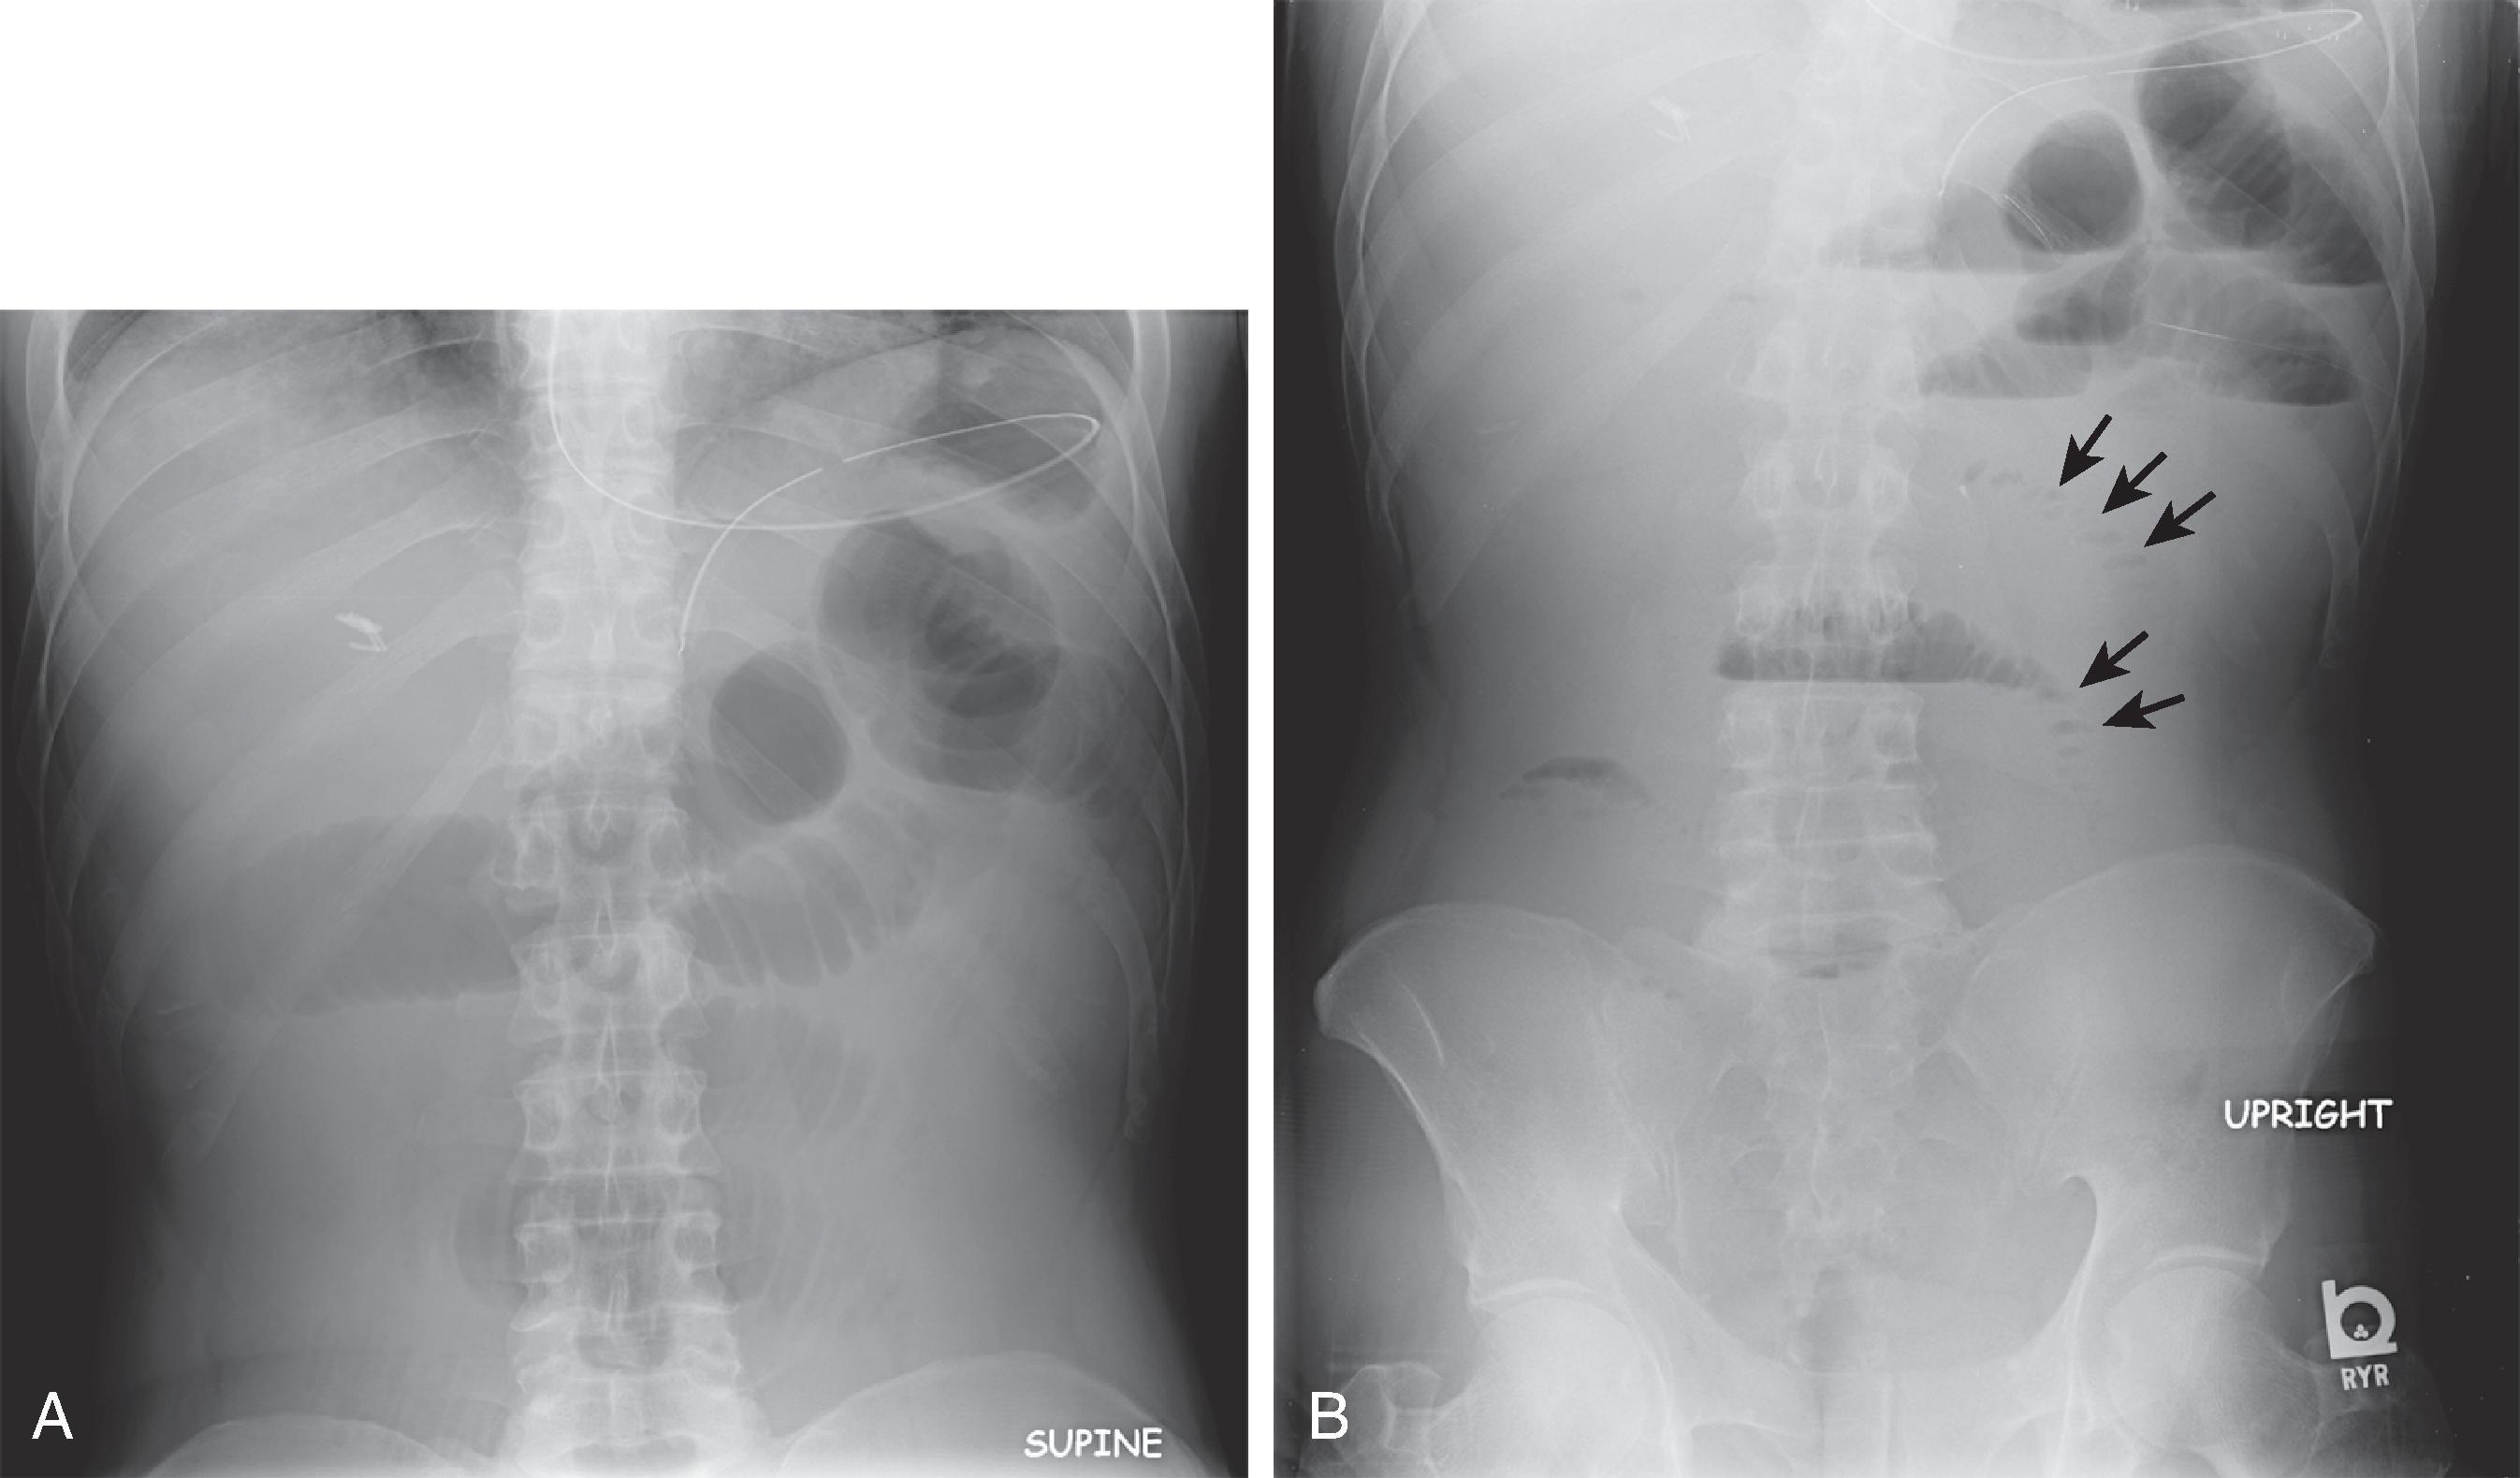 Fig. 2.3, Small bowel obstruction. (A) Supine abdominal radiograph shows dilated small bowel loops in the upper abdomen with a paucity of colonic gas. (B) Upright radiograph demonstrates multiple air-fluid levels. Small amounts of gas trapped between small bowel folds in the left midabdomen ( arrows ) produce the string of pearls sign.